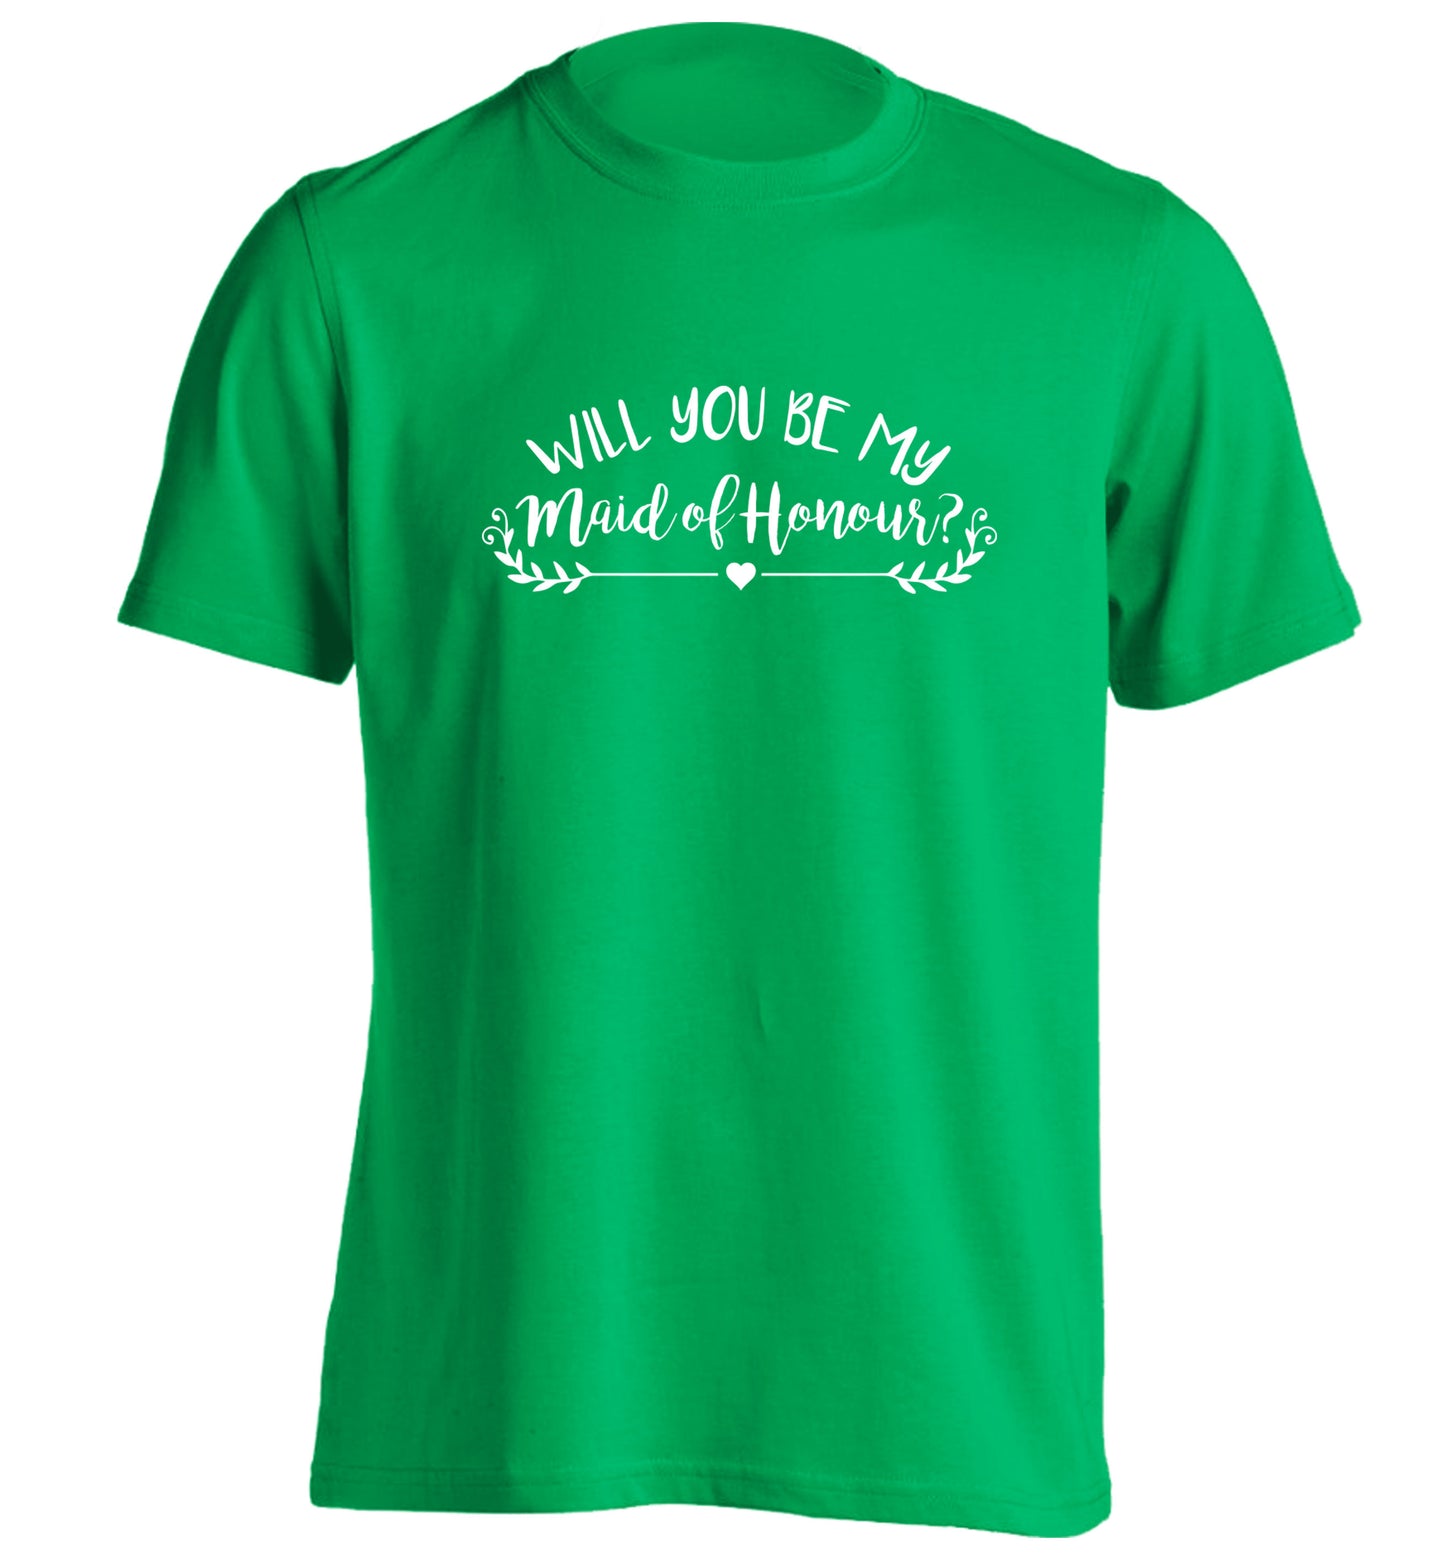 Will you be my maid of honour? adults unisex green Tshirt 2XL